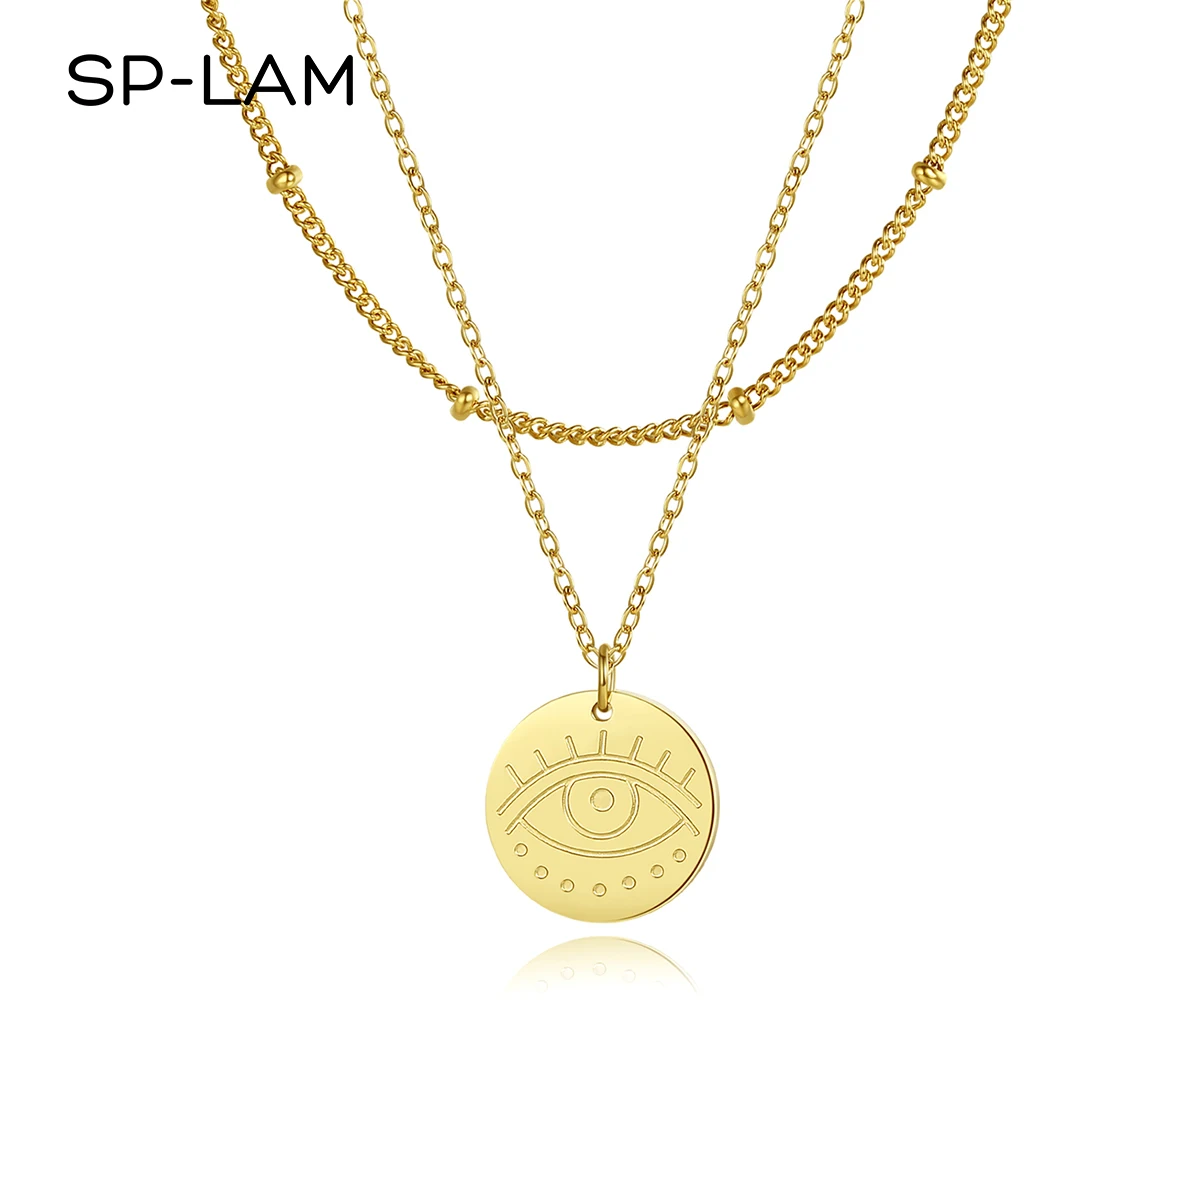 

SP-LAM Stainless Steel Pendant Jewelry Multi Layer Layered Gold Plated Double Chain Necklace